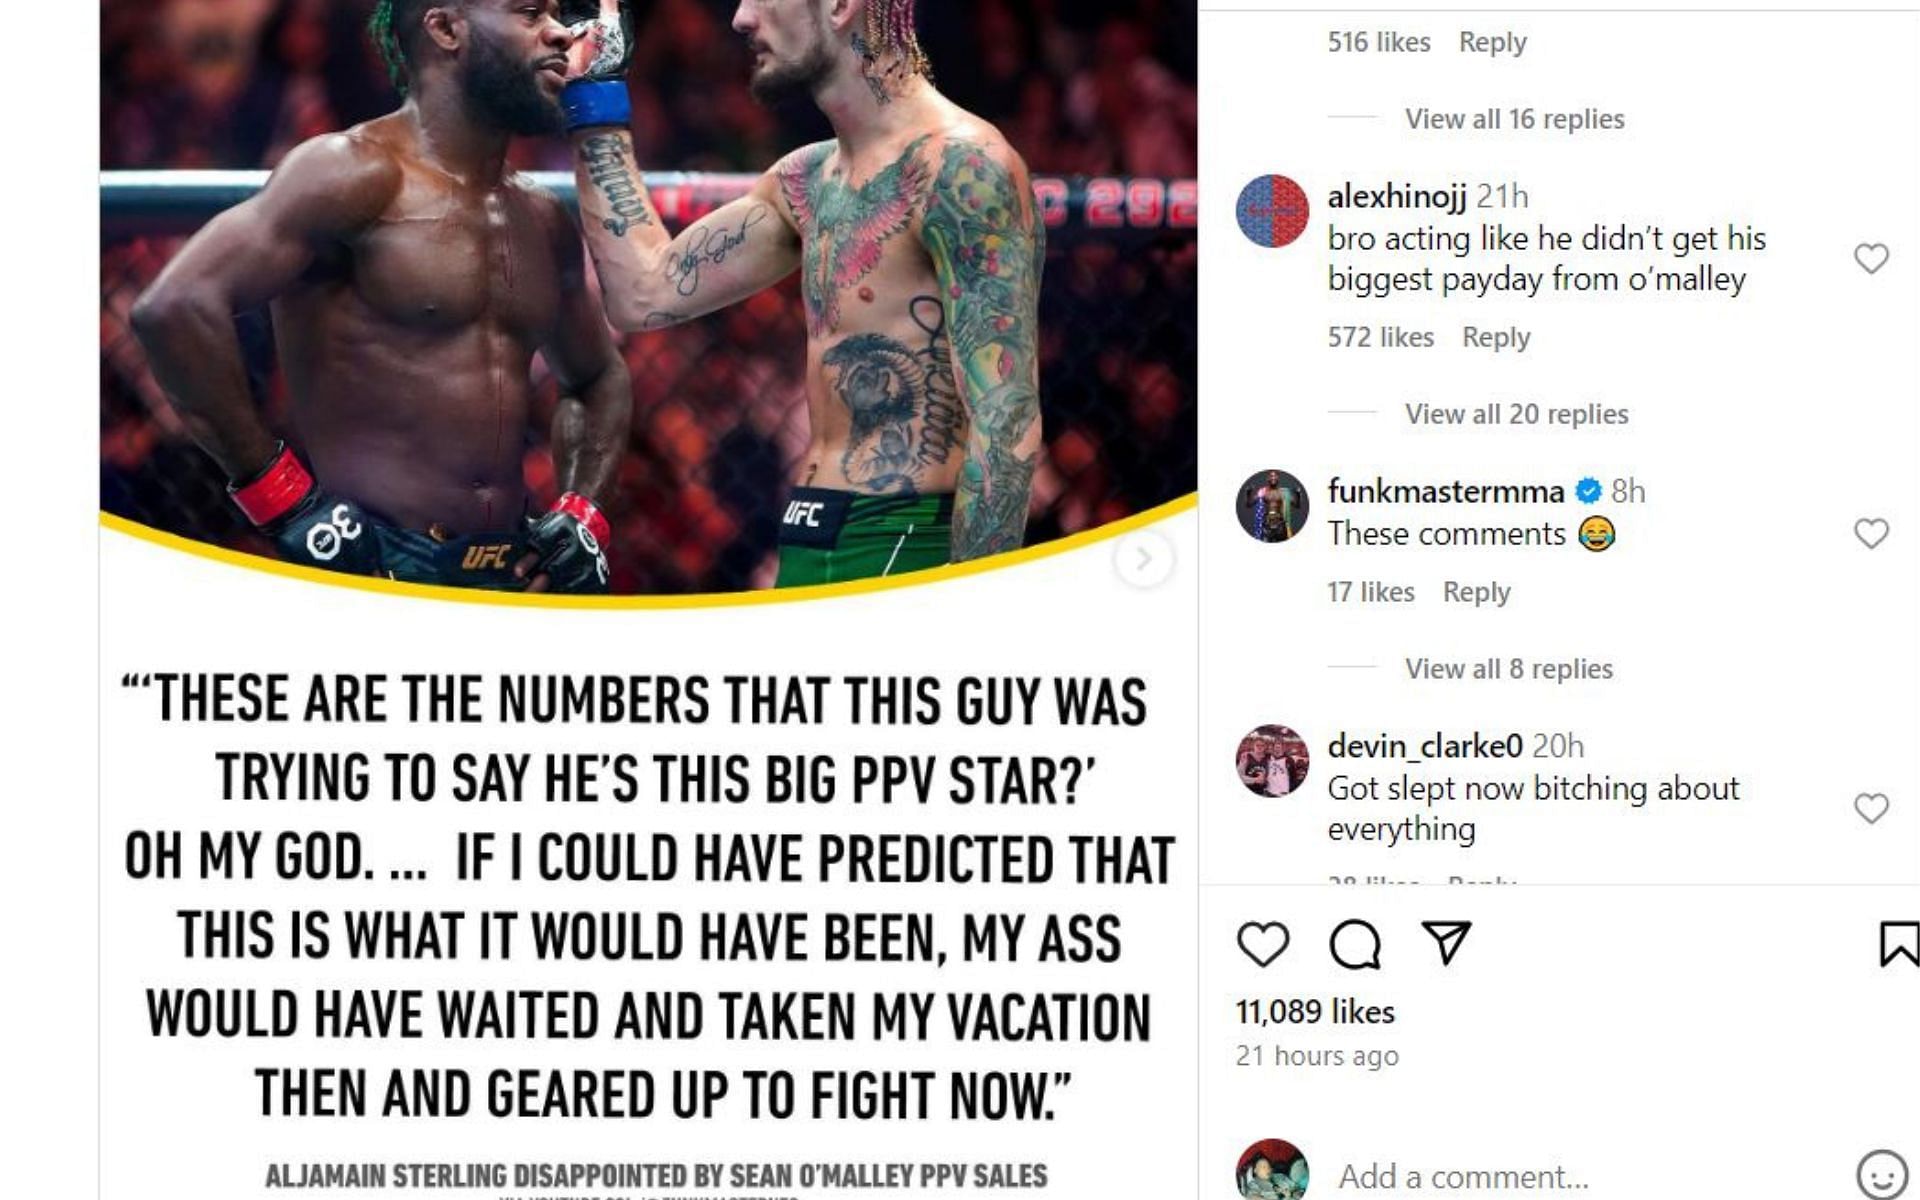 Aljamain Sterling reacts to trolling from MMA fans